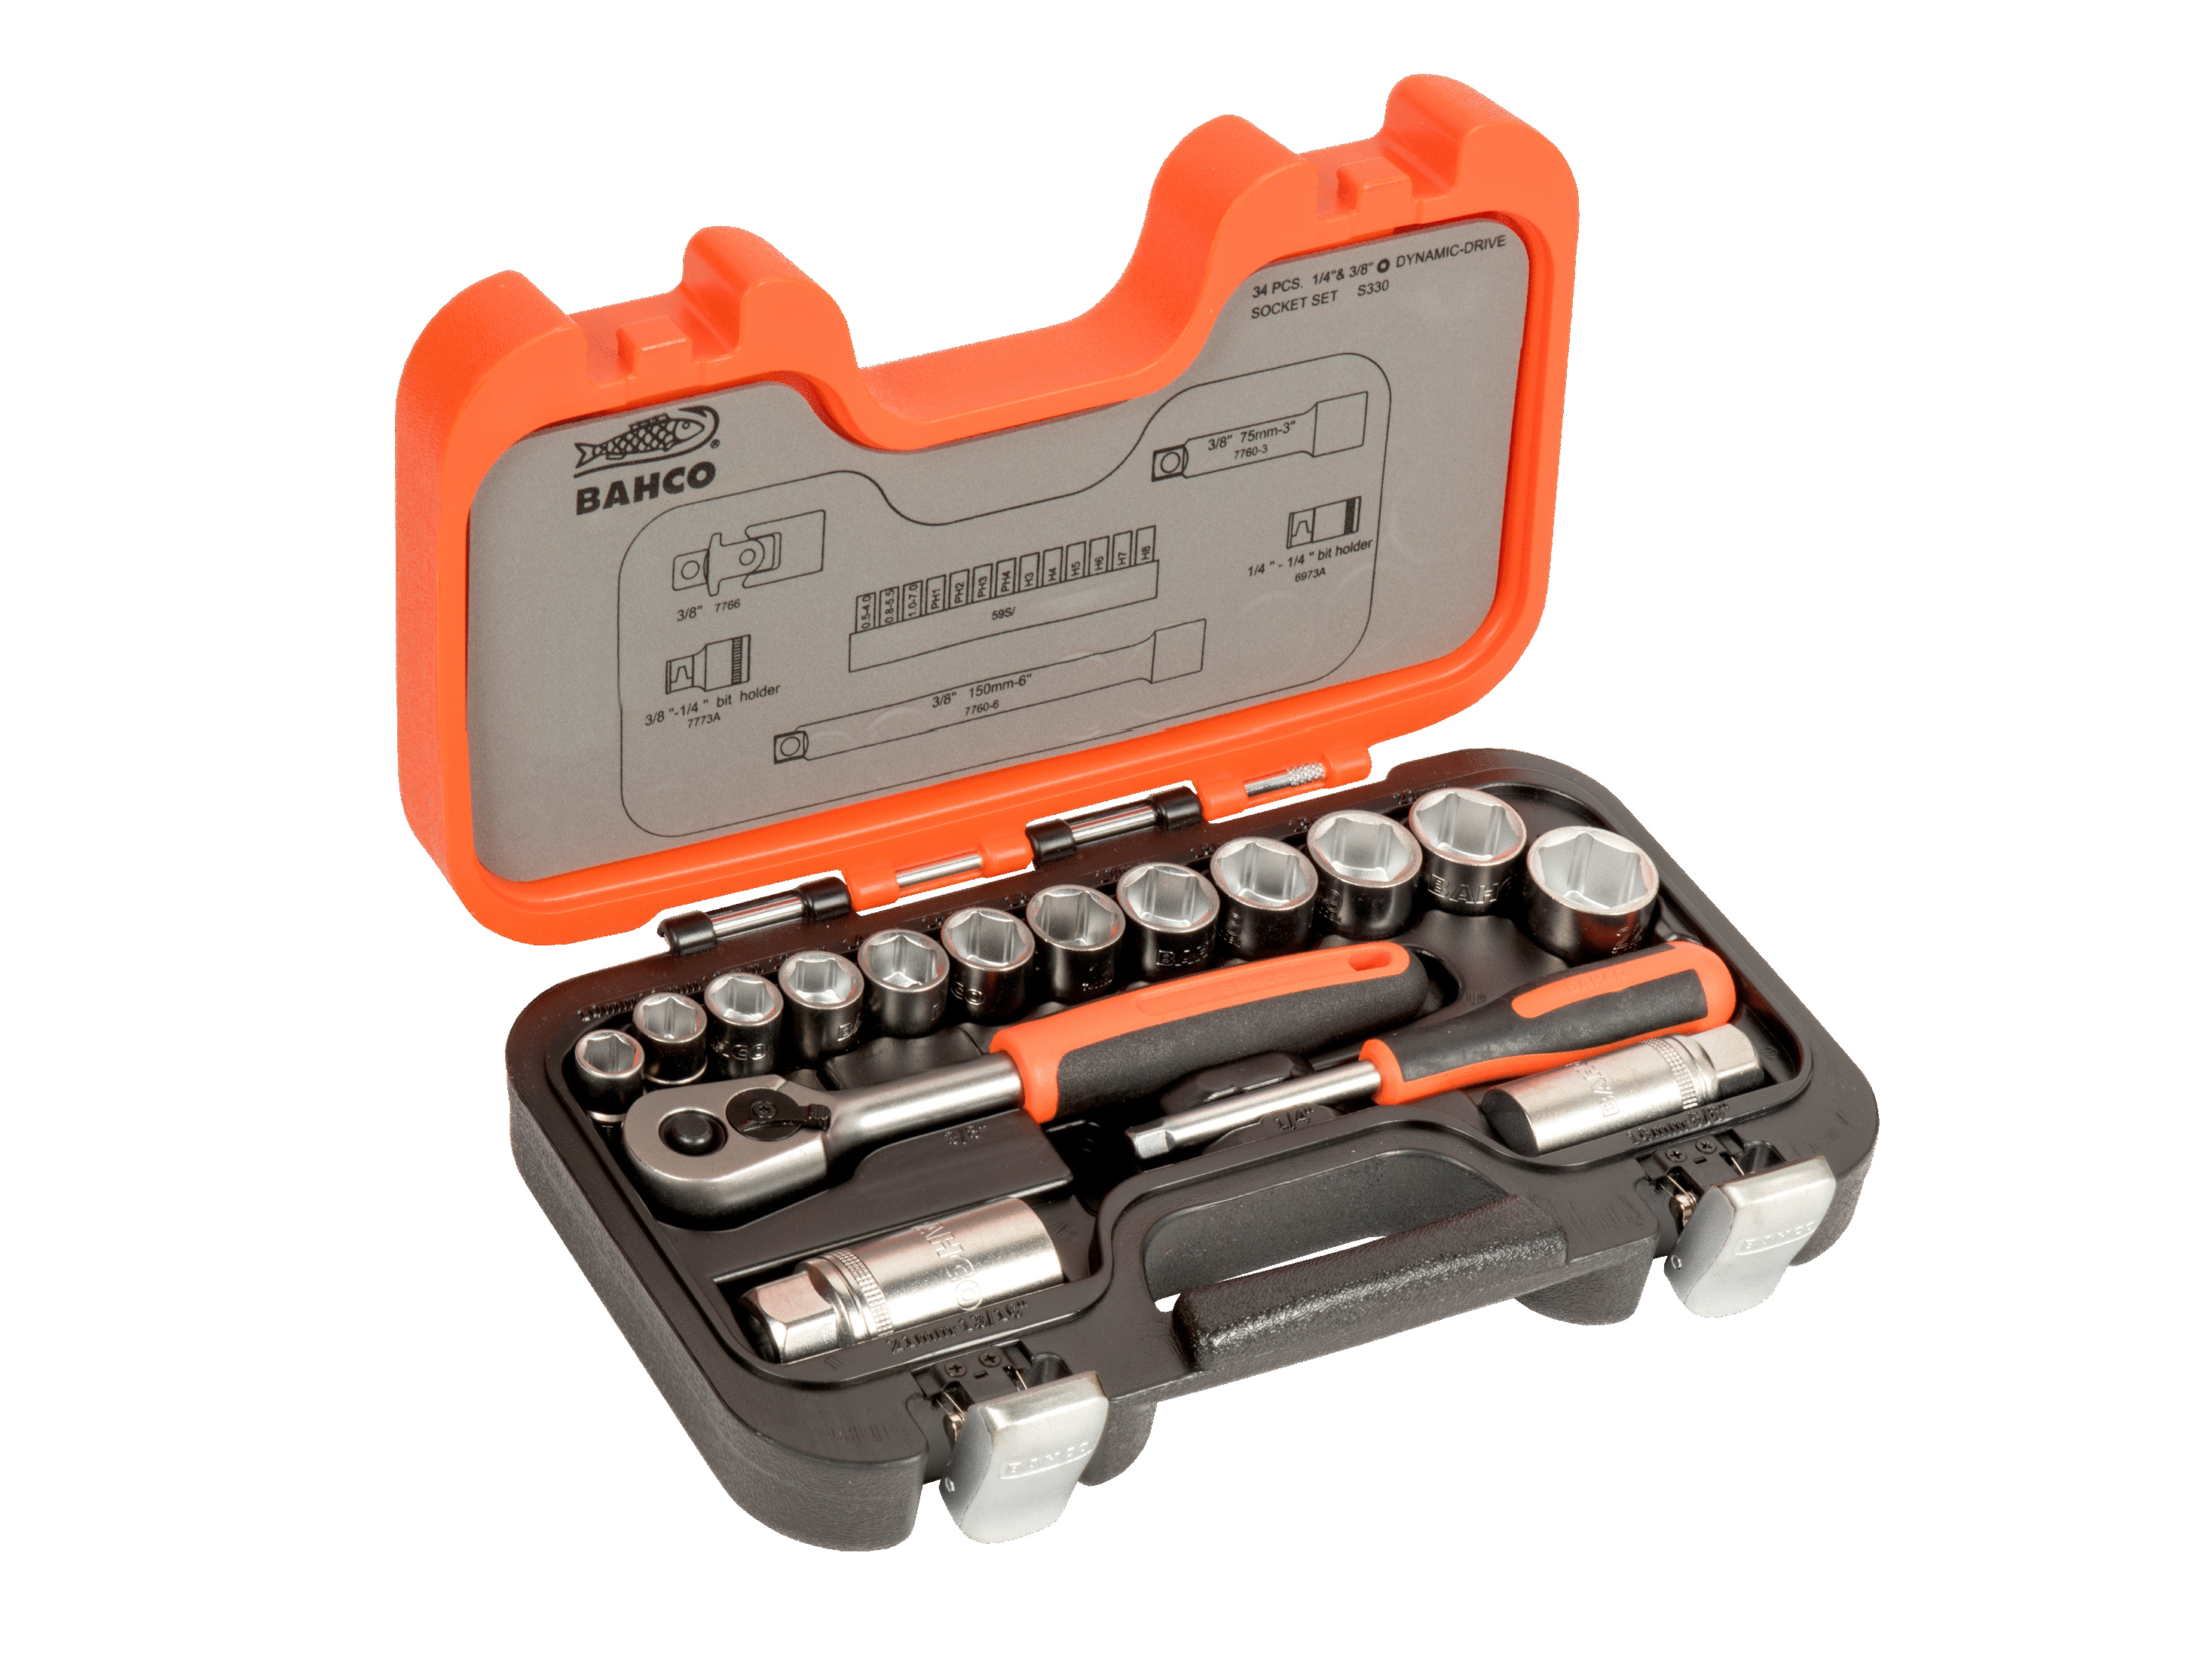 BAHCO 34 PIECE MIXED 1/4IN & 3/8IN SOCKET SET